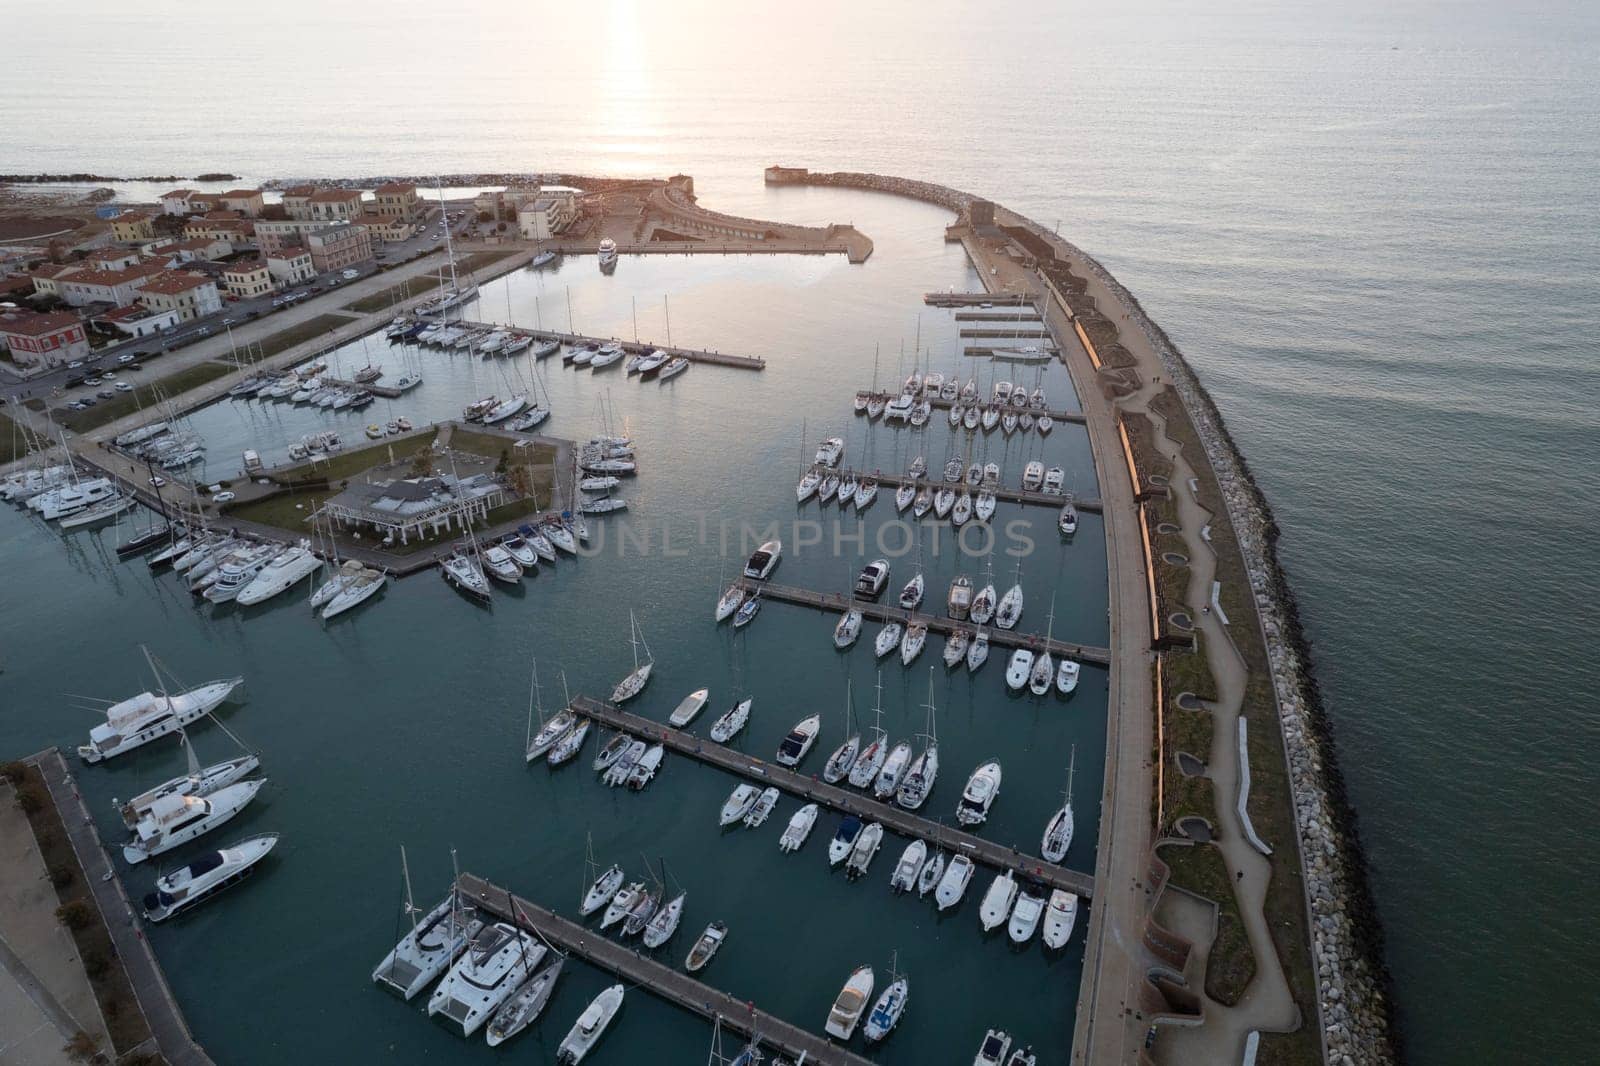 Aerial photographic documentation of the port of Marina di Pisa at sunset 